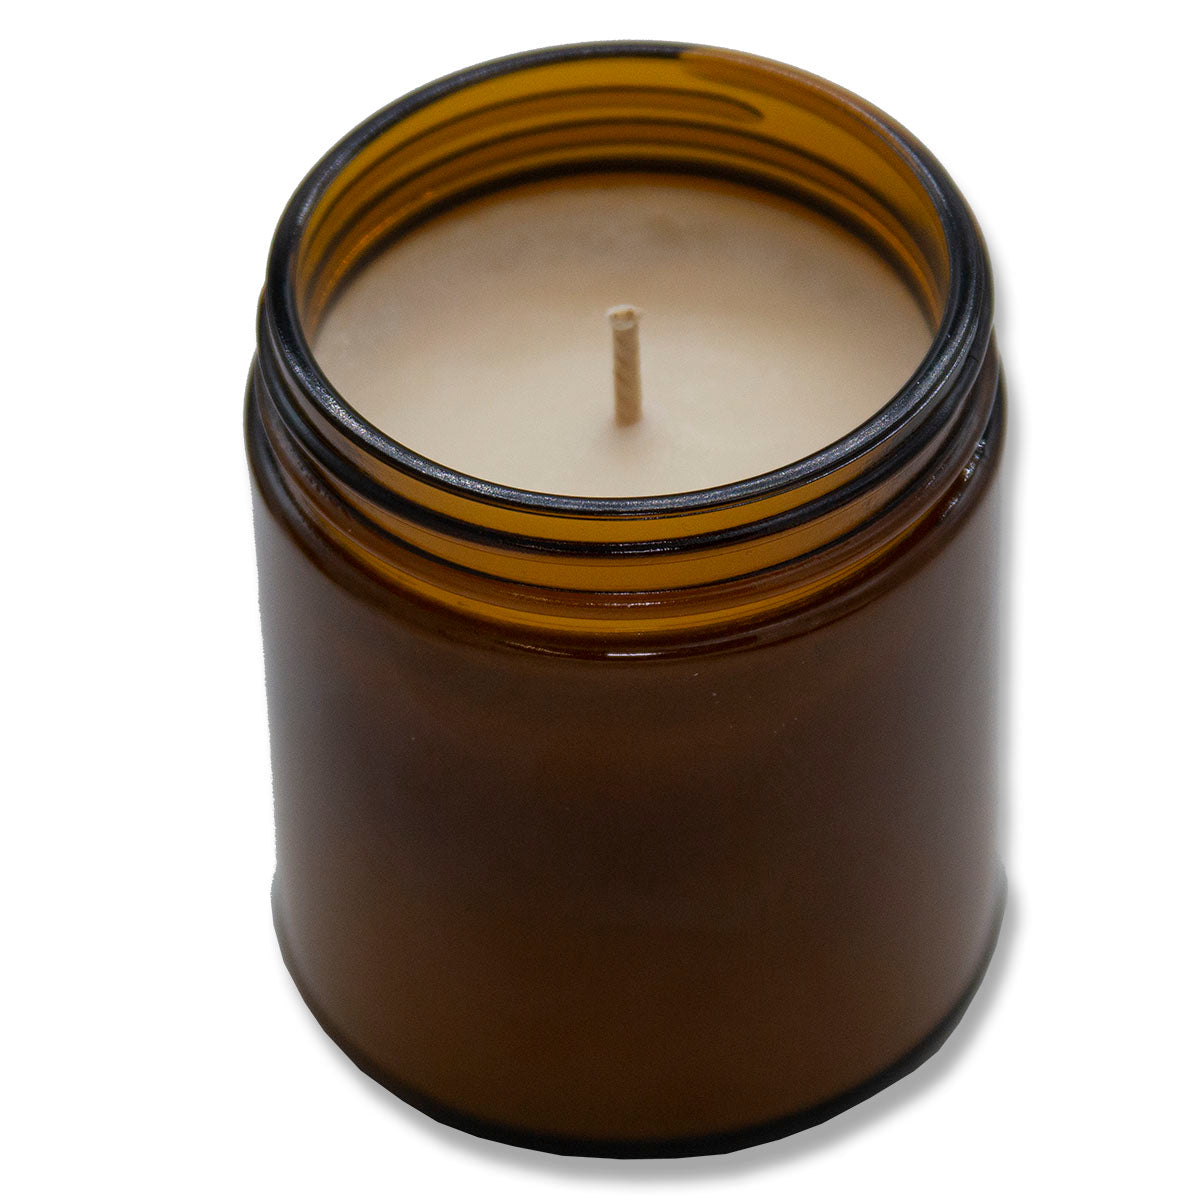 Autumn Cider, Lone Star Candles & More's Premium Hand Poured Strongly Scented Soy Wax Gift Candle, Fall Spices, Sweet Musk, & A Hint of Pineapple, US Made in Texas, Amber Glass Jar 9oz Merry Christmas